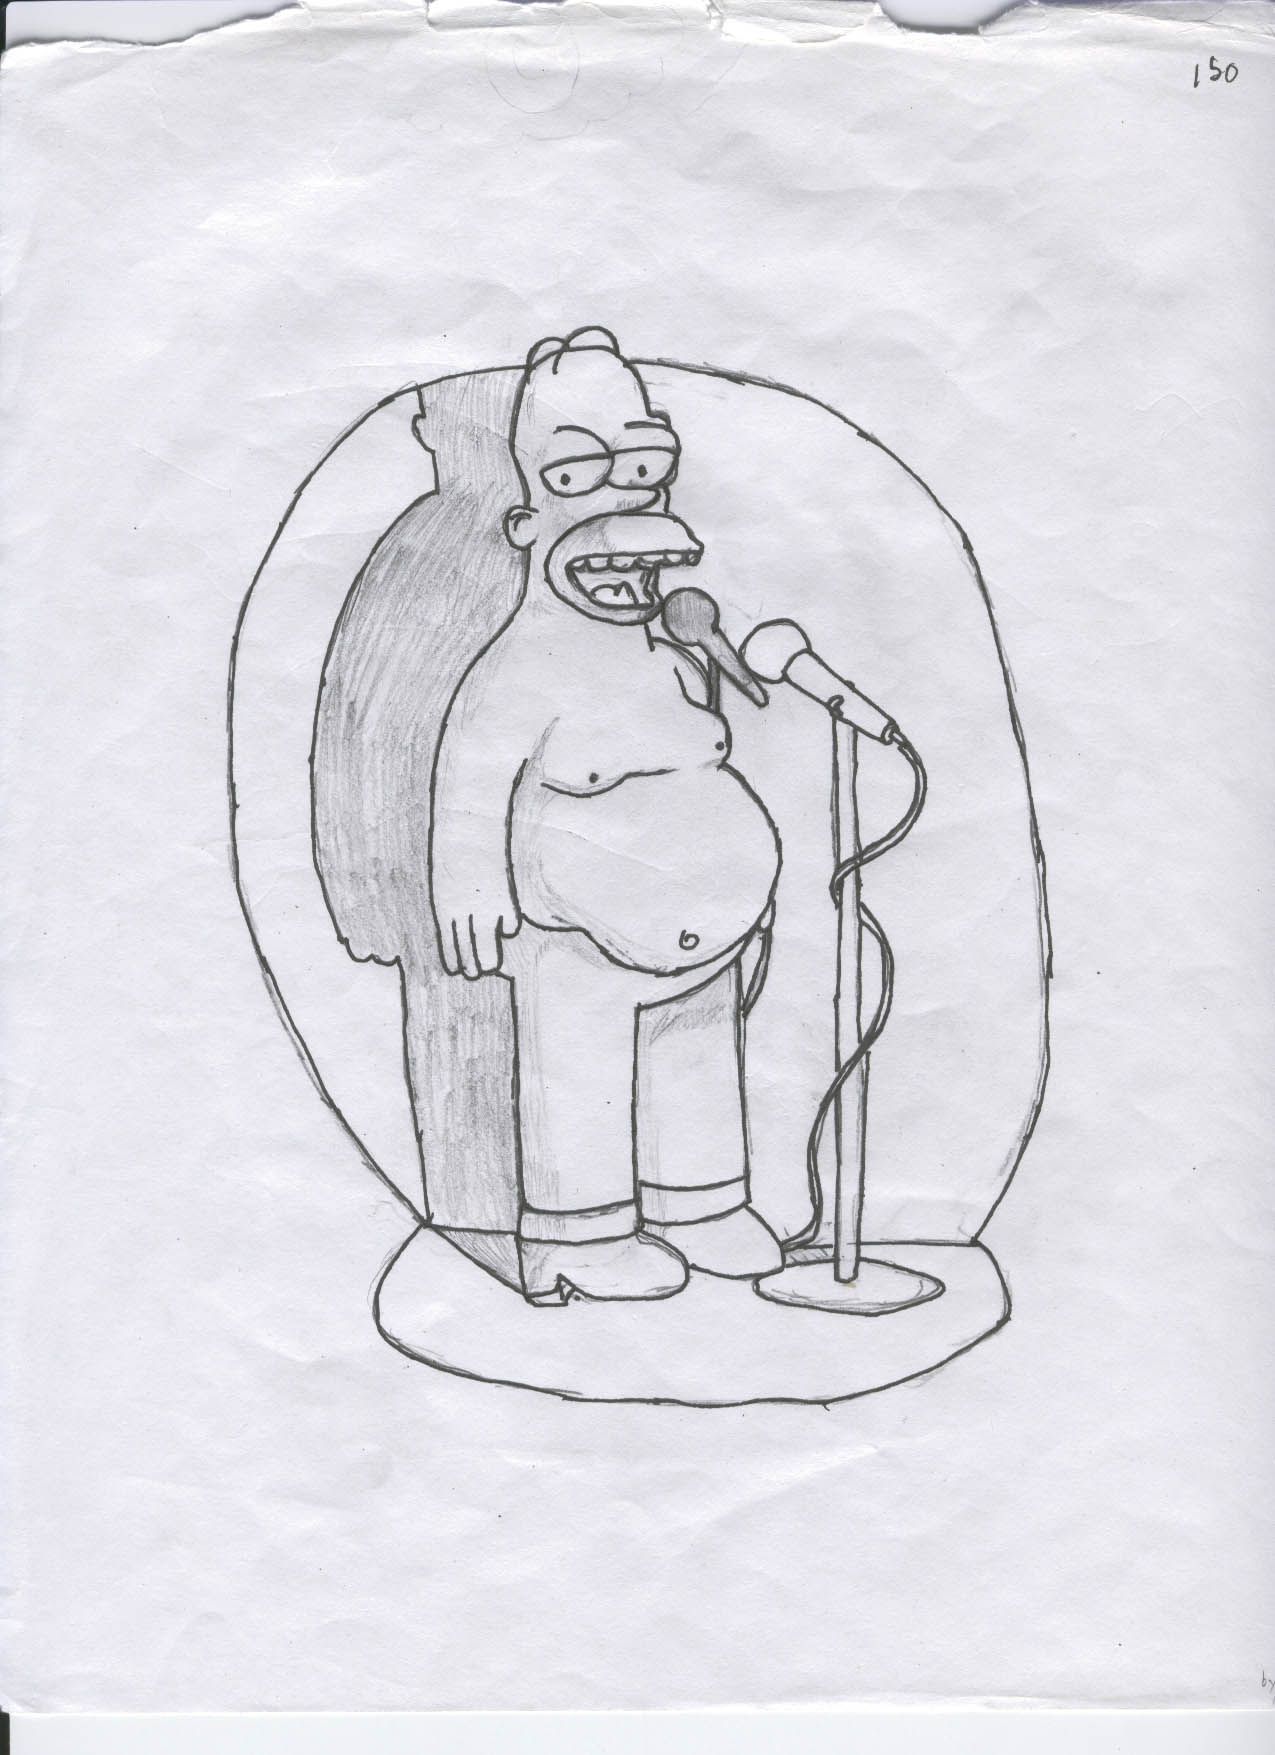 homer the camedian by SPAWN1000